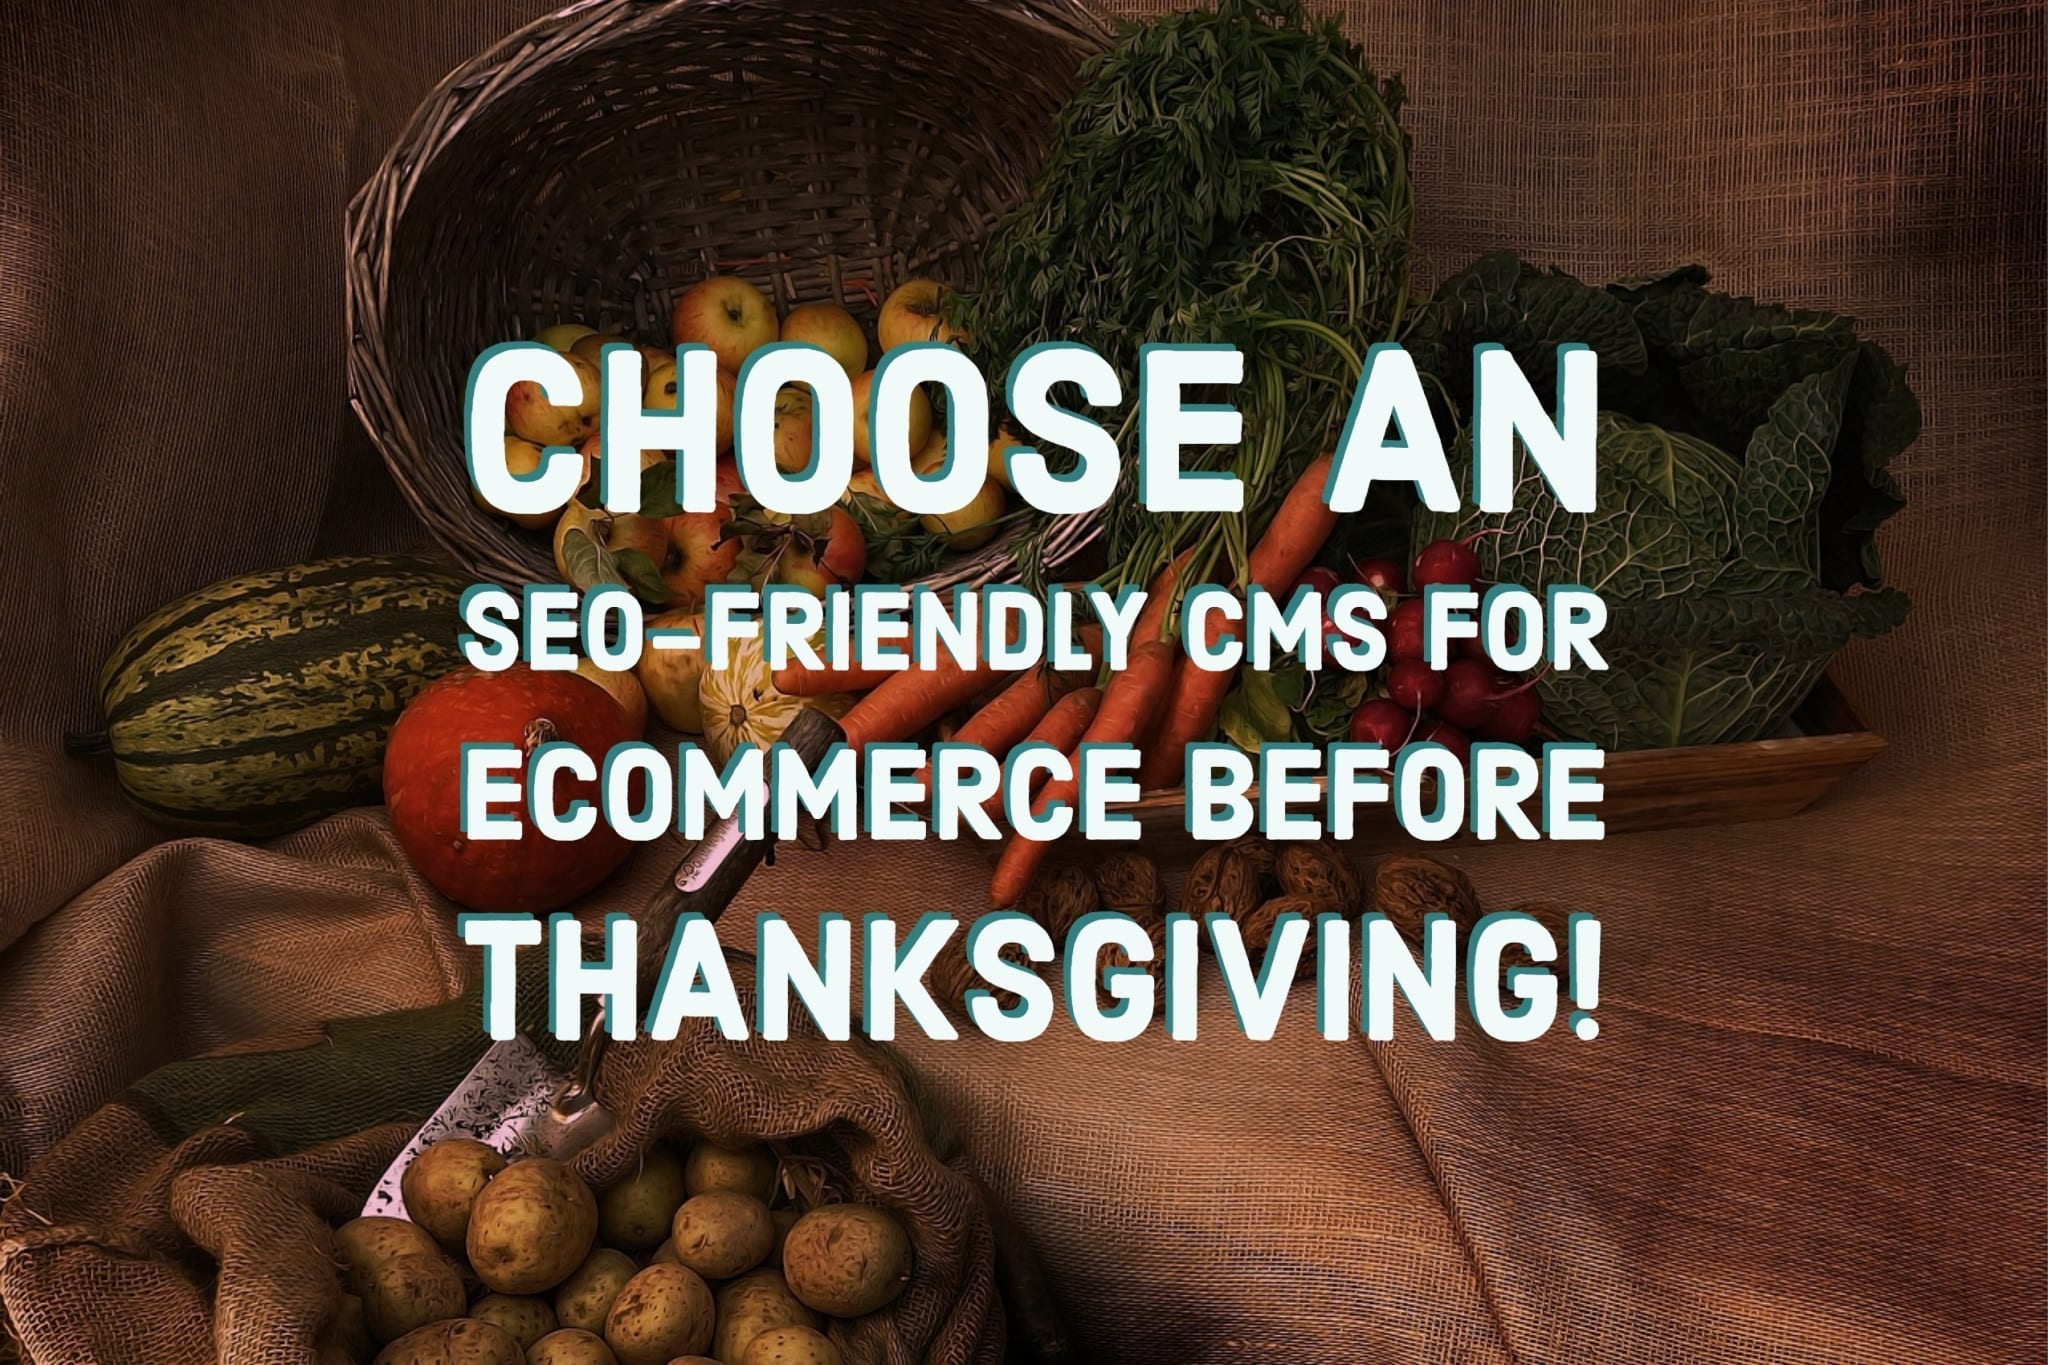 Choose an seo-friendly cms for ecommerce before Thanksgiving